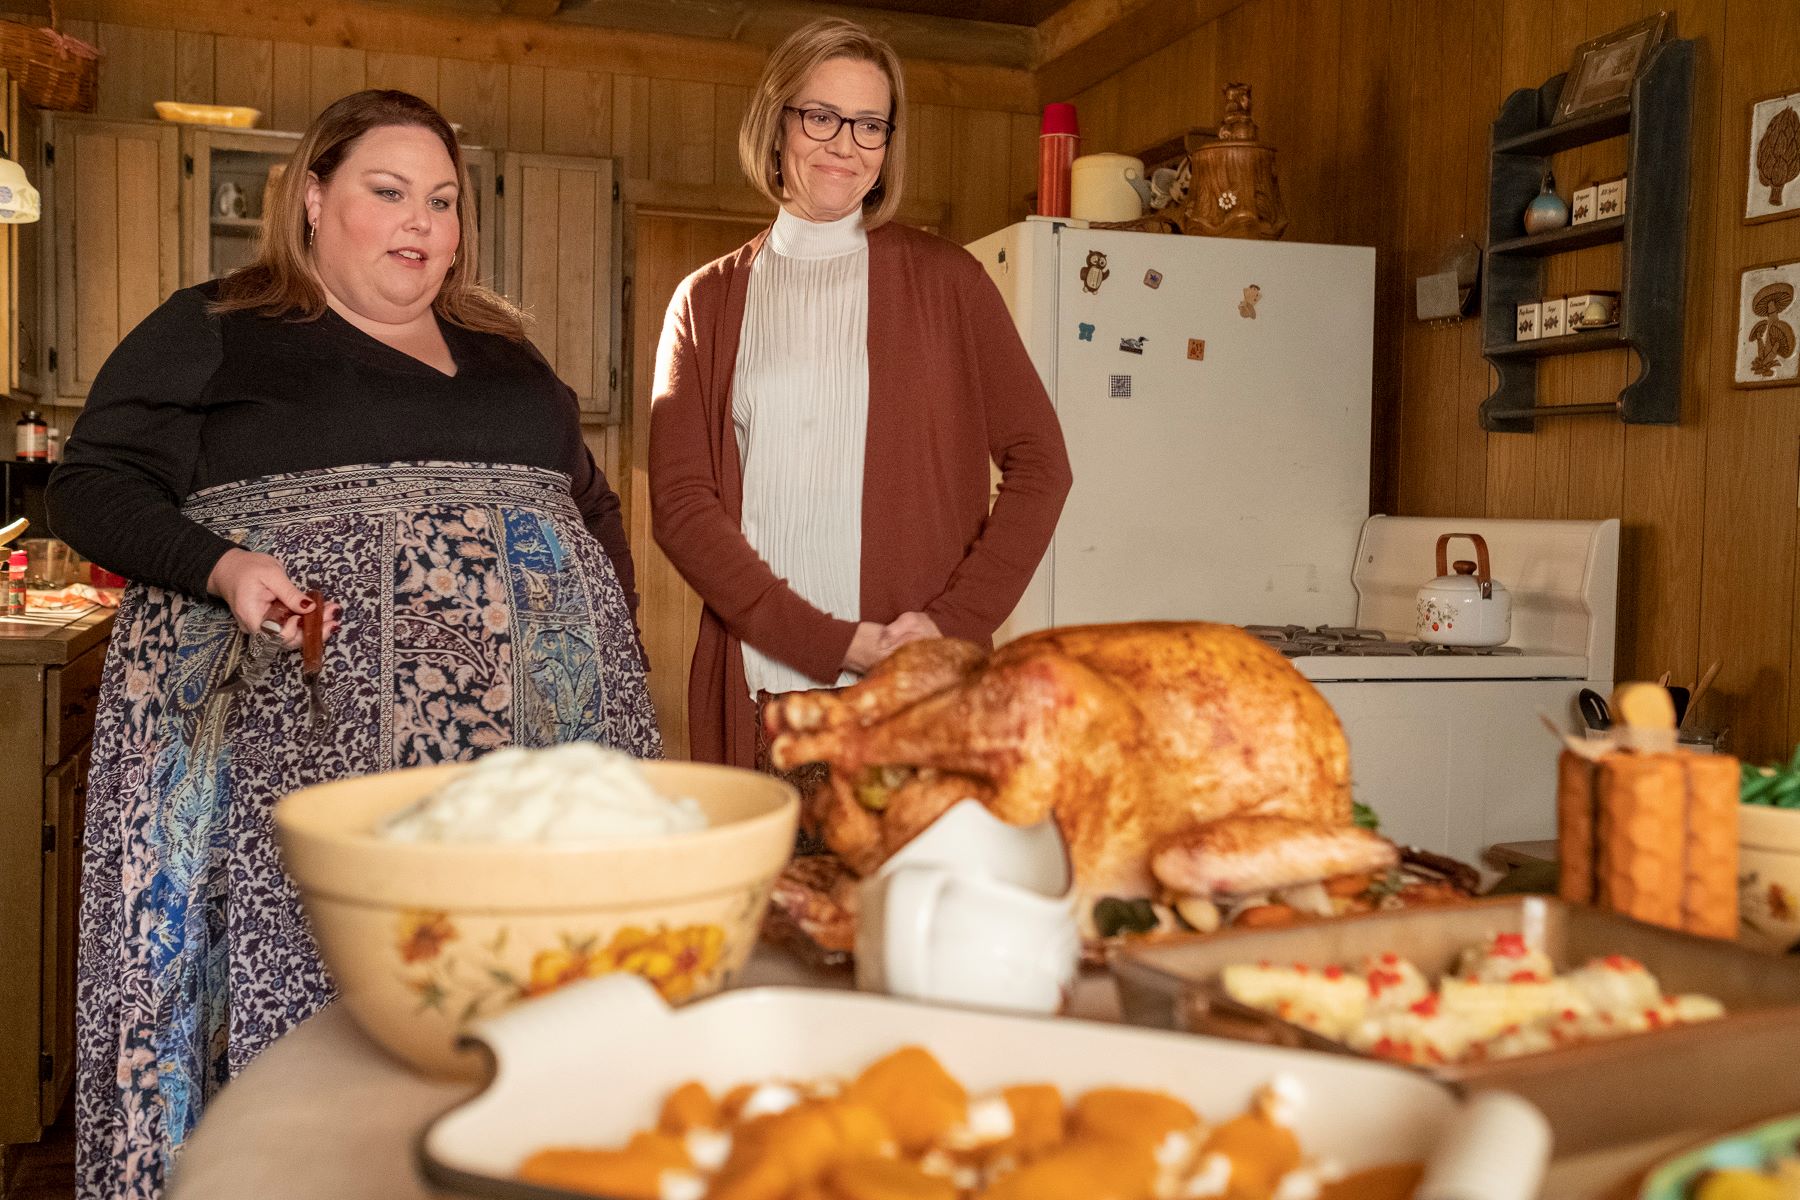 Chrissy Metz as Kate and Mandy Moore as Rebecca